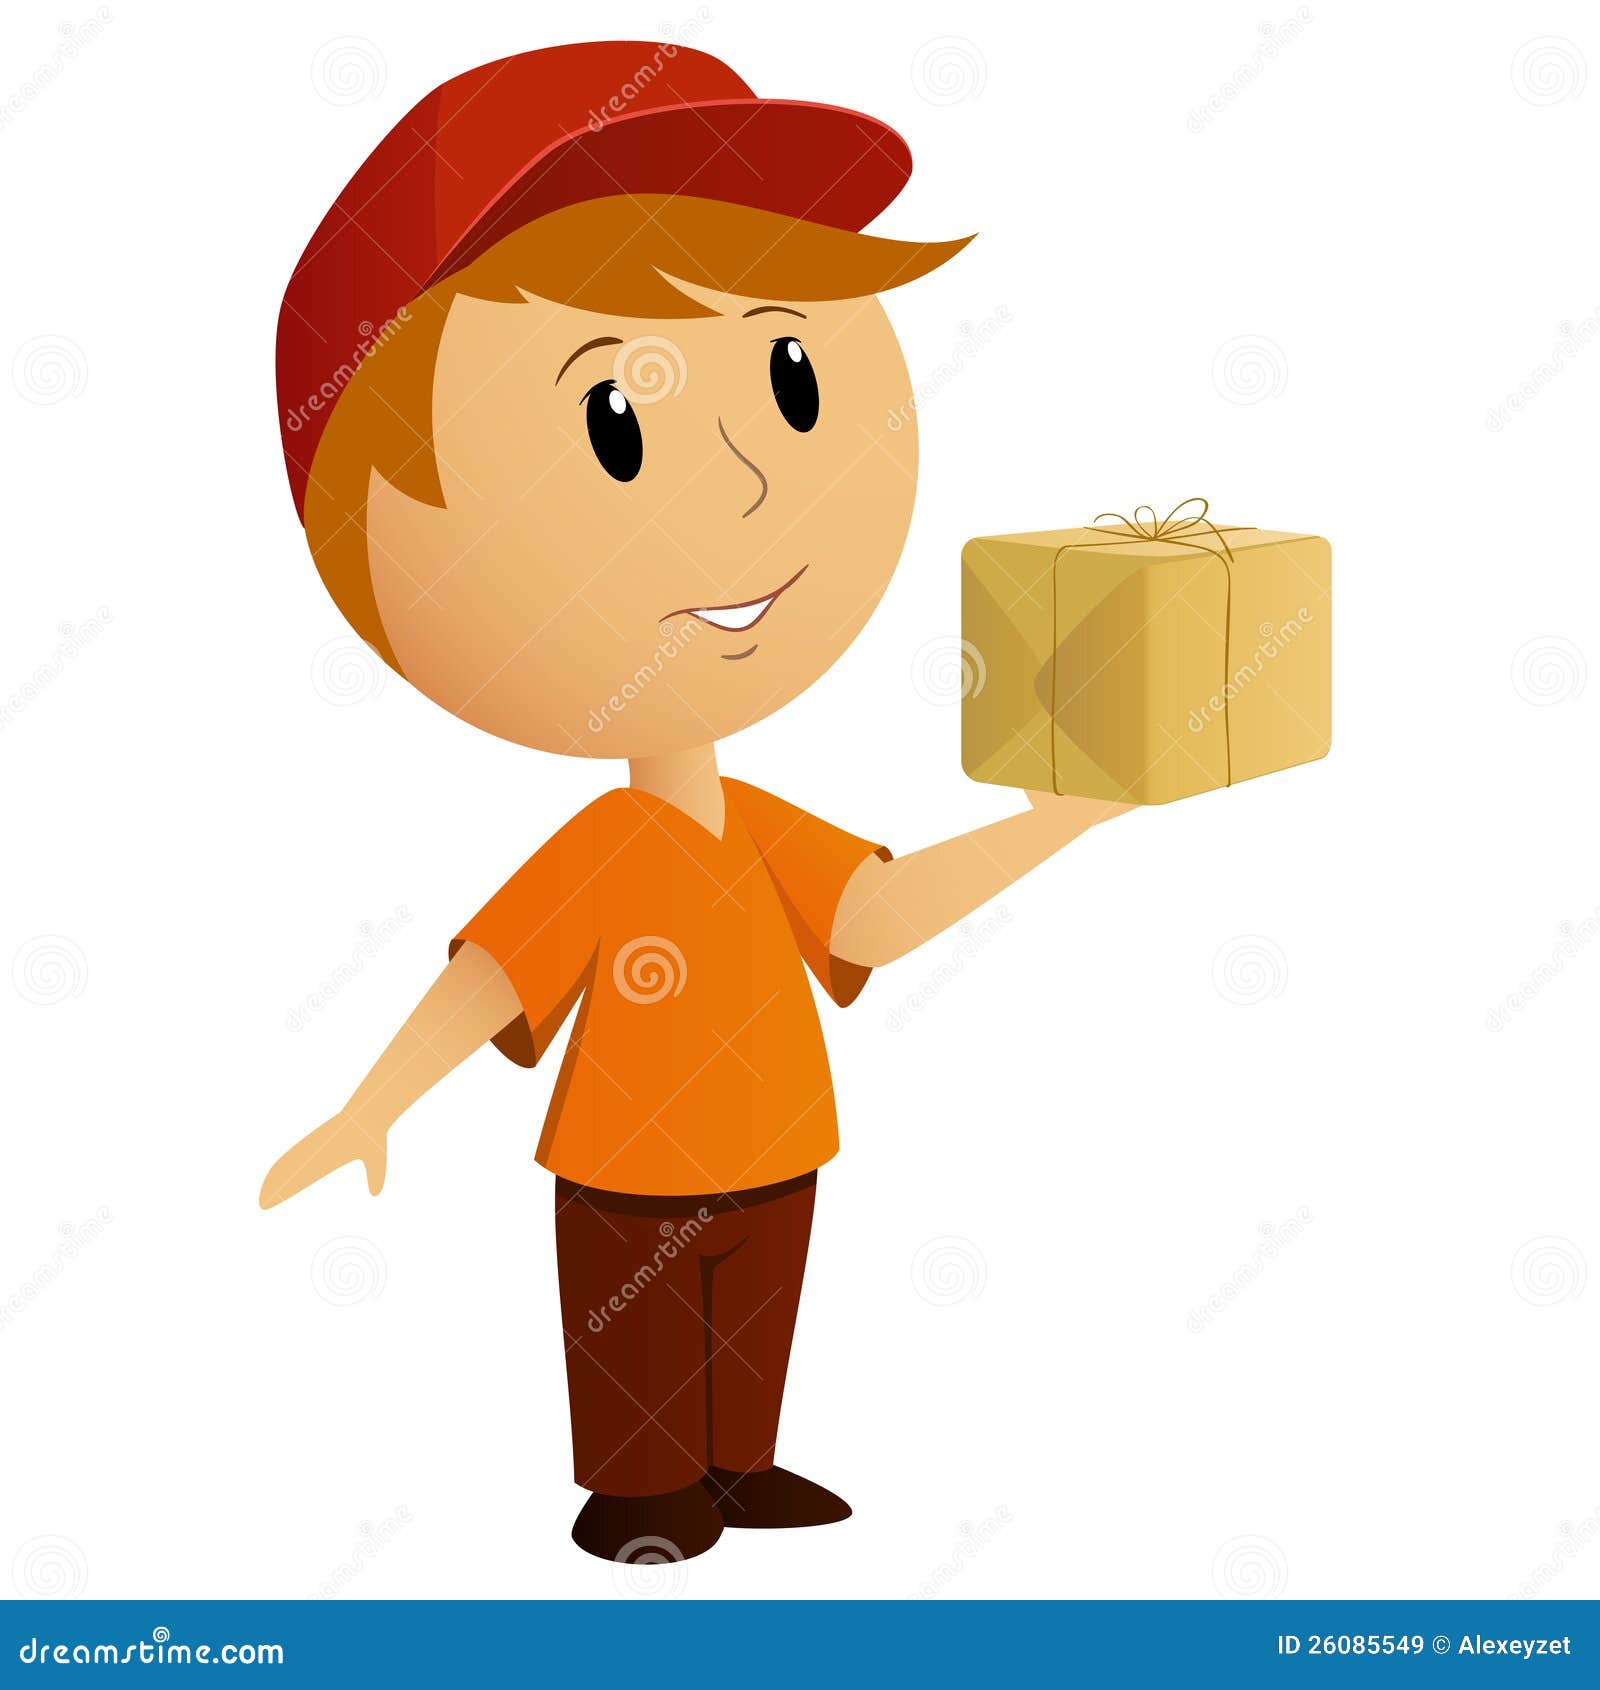 clipart delivery boy - photo #4